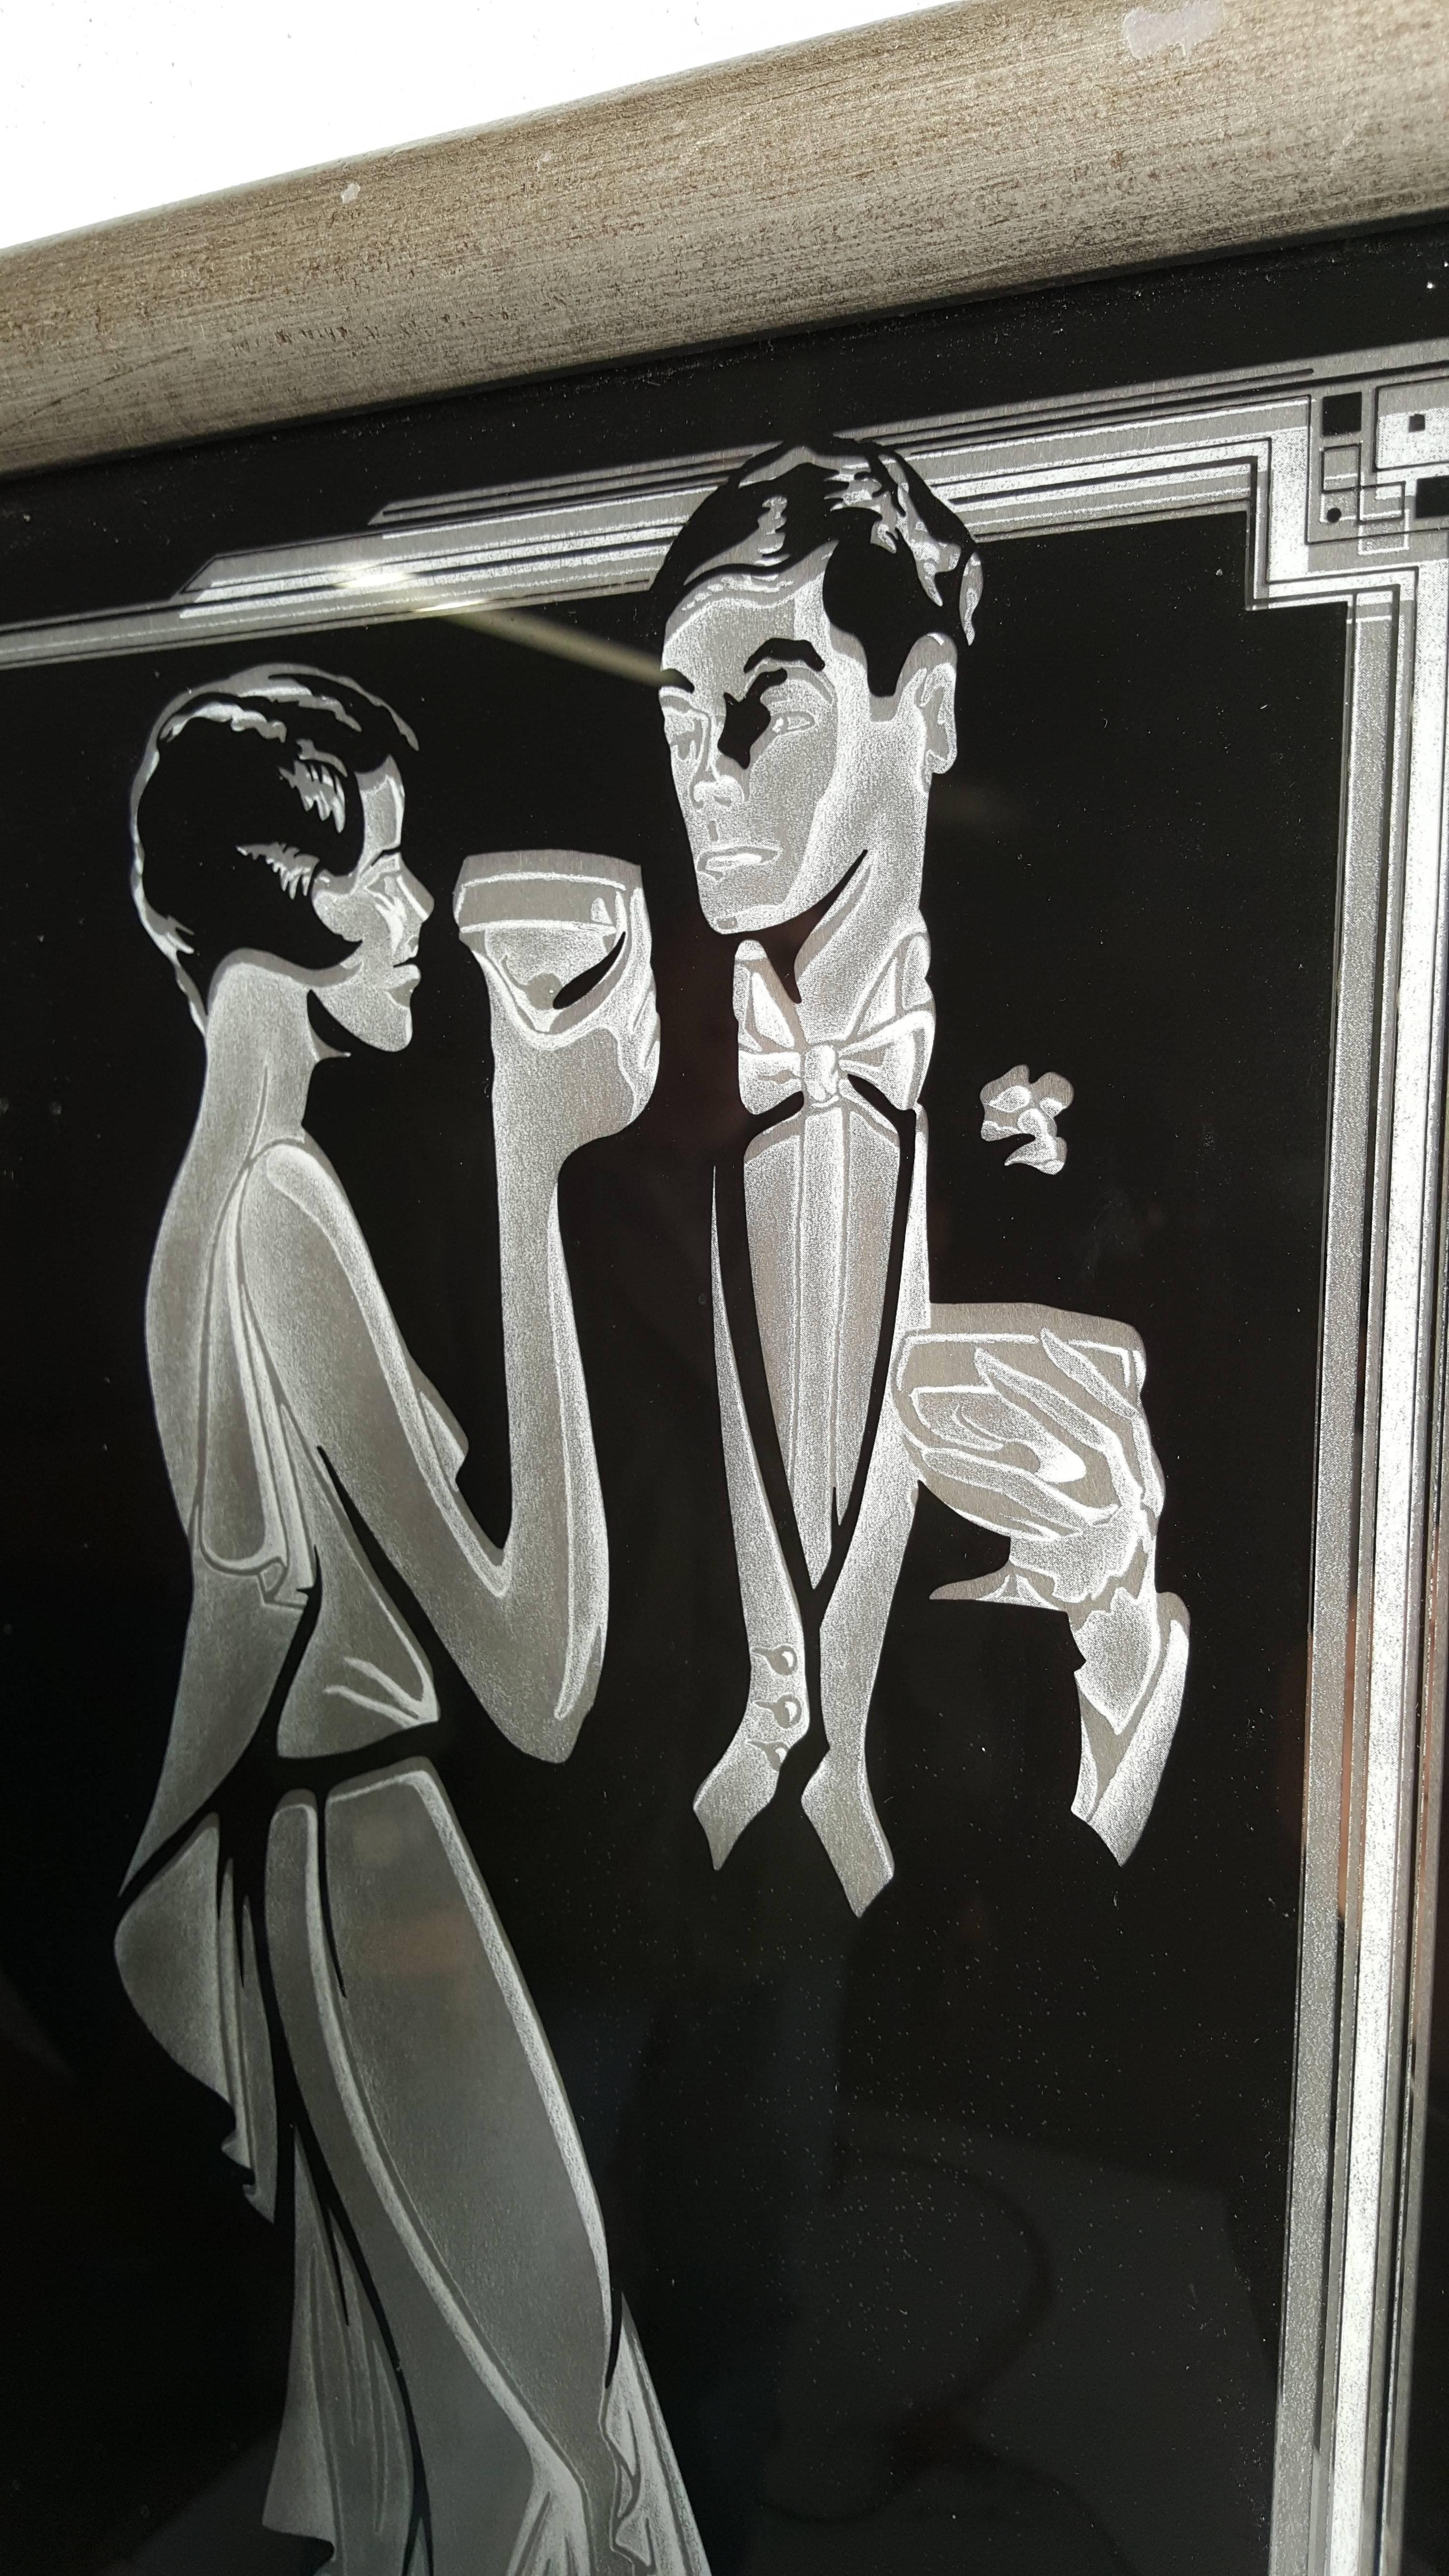 Reverse painted glass Art Deco 'Cocktail' wall decor. Classic Art Deco design, original silver frame, image takes you back in time, night clubs, music, jazz and cocktails.